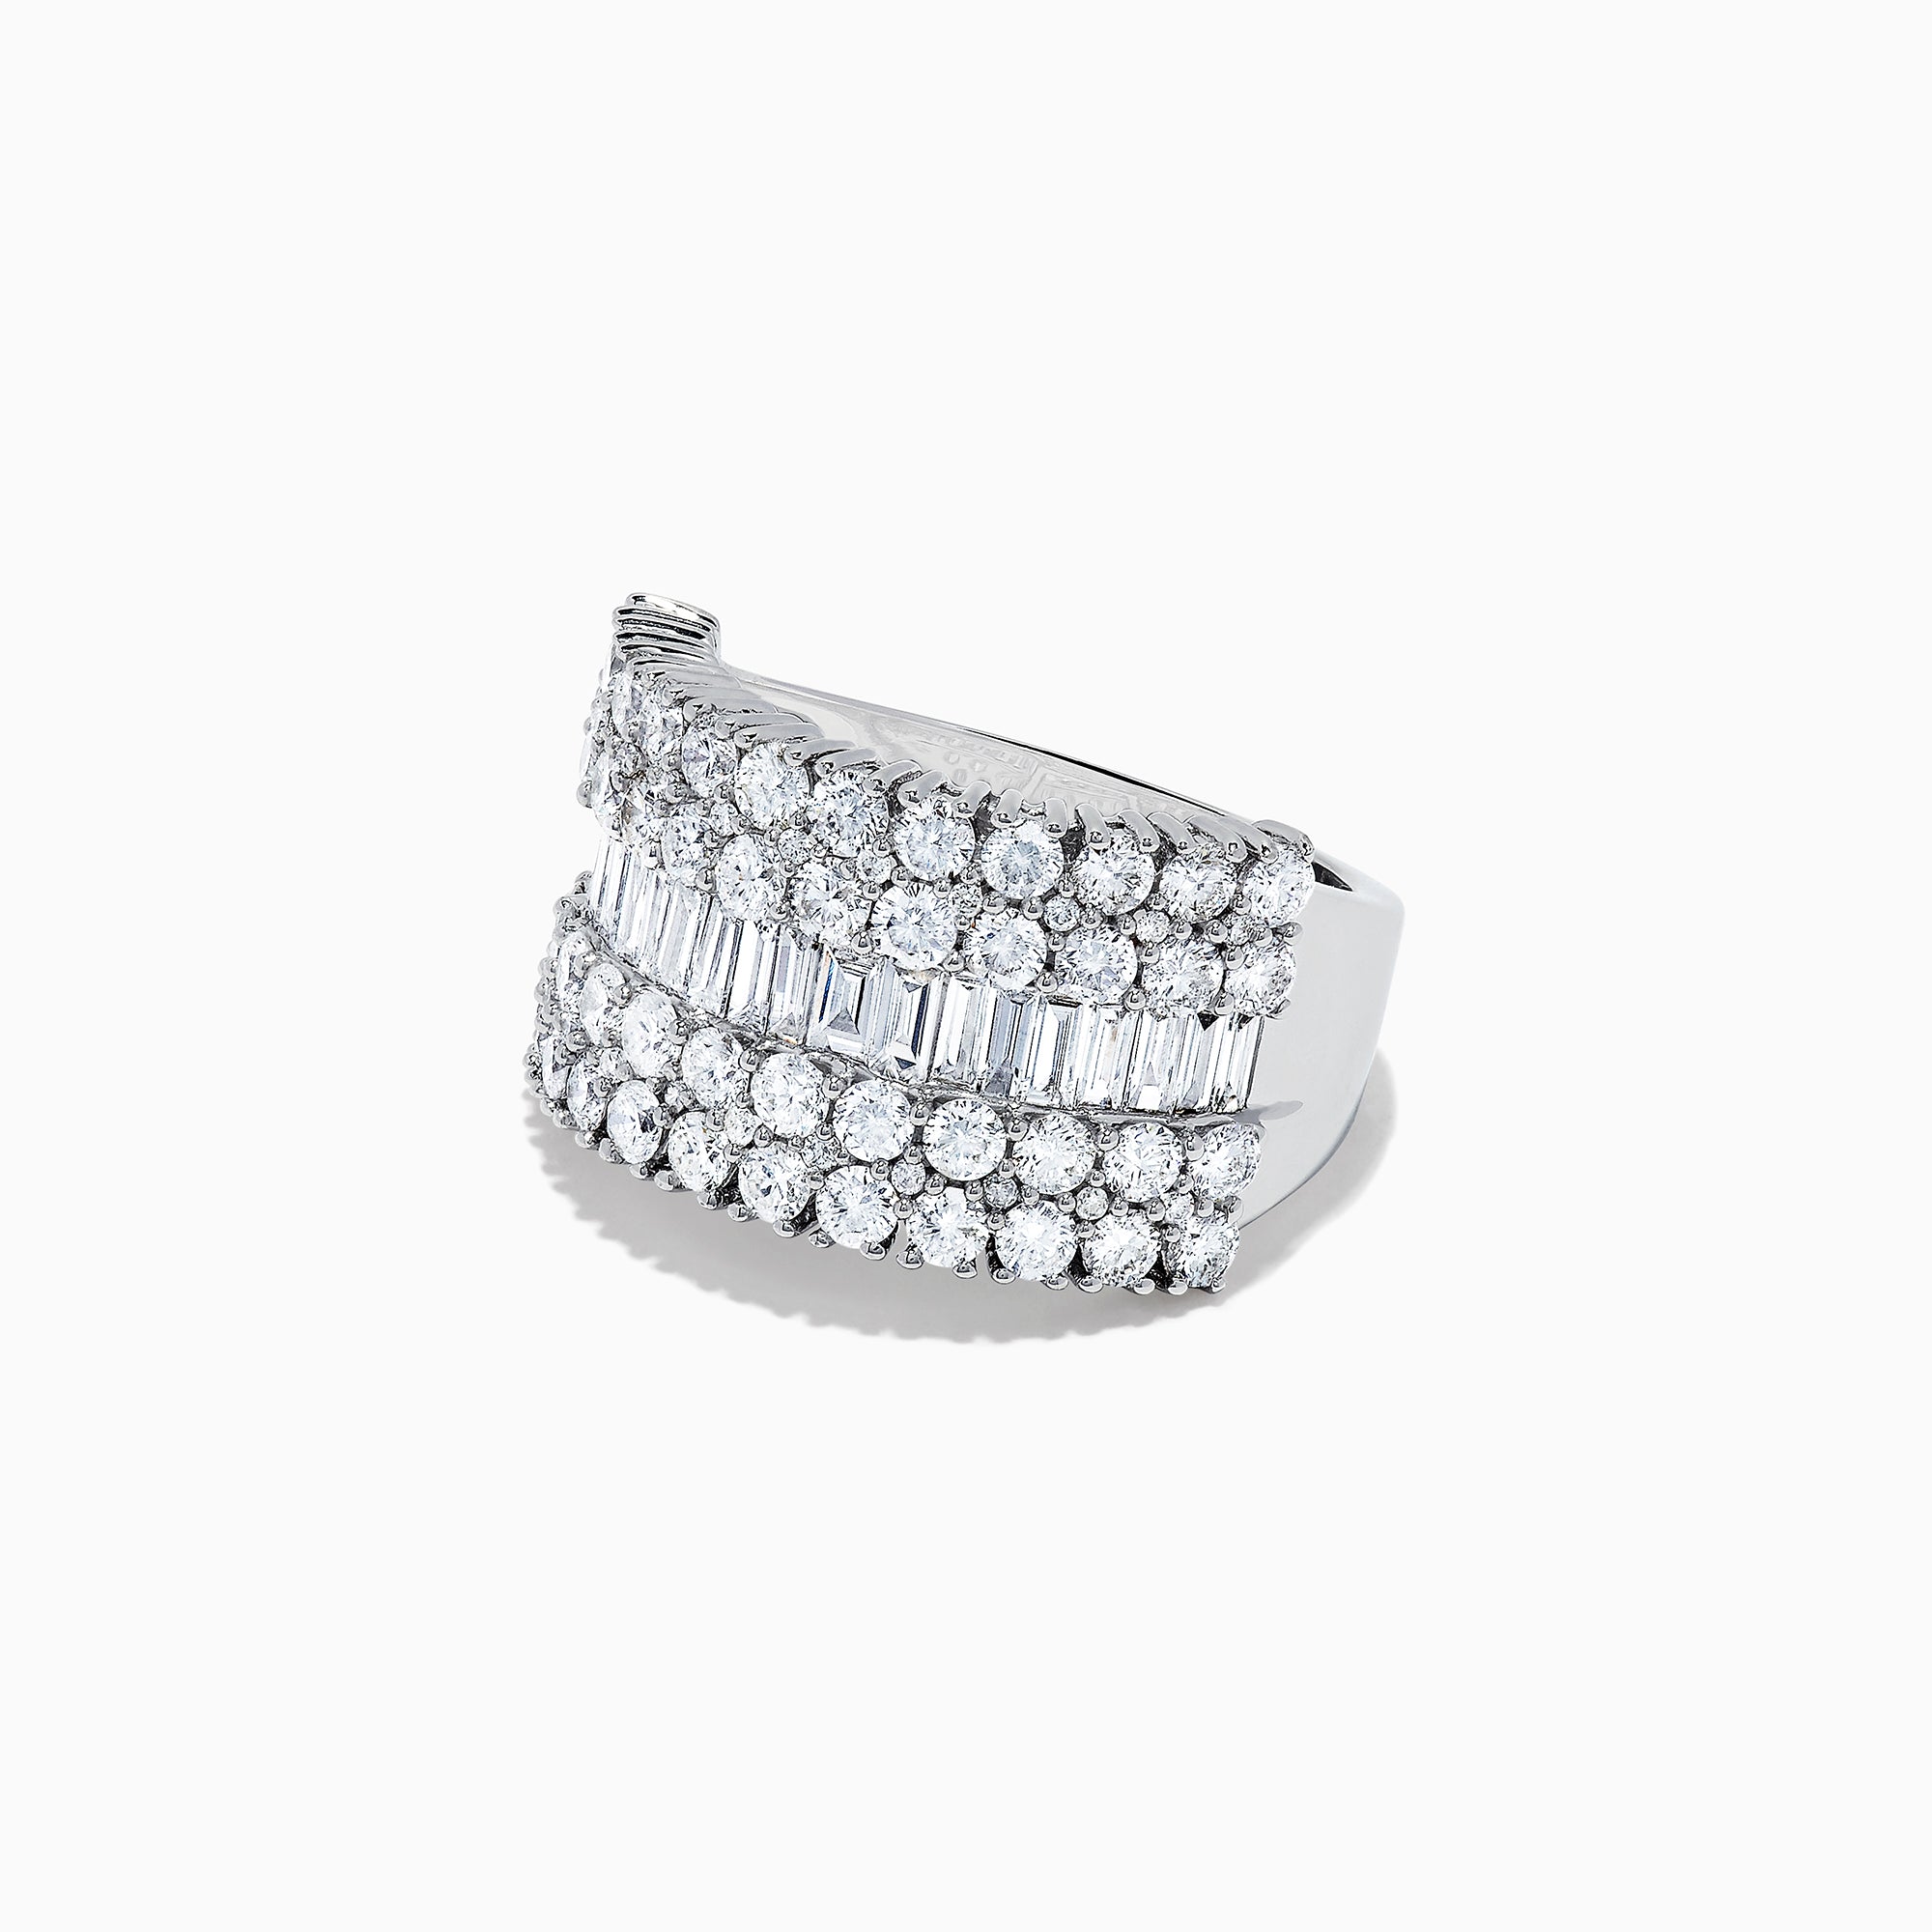 Effy Classique 14K White Gold Diamond Wide Band Ring, 2.47 TCW